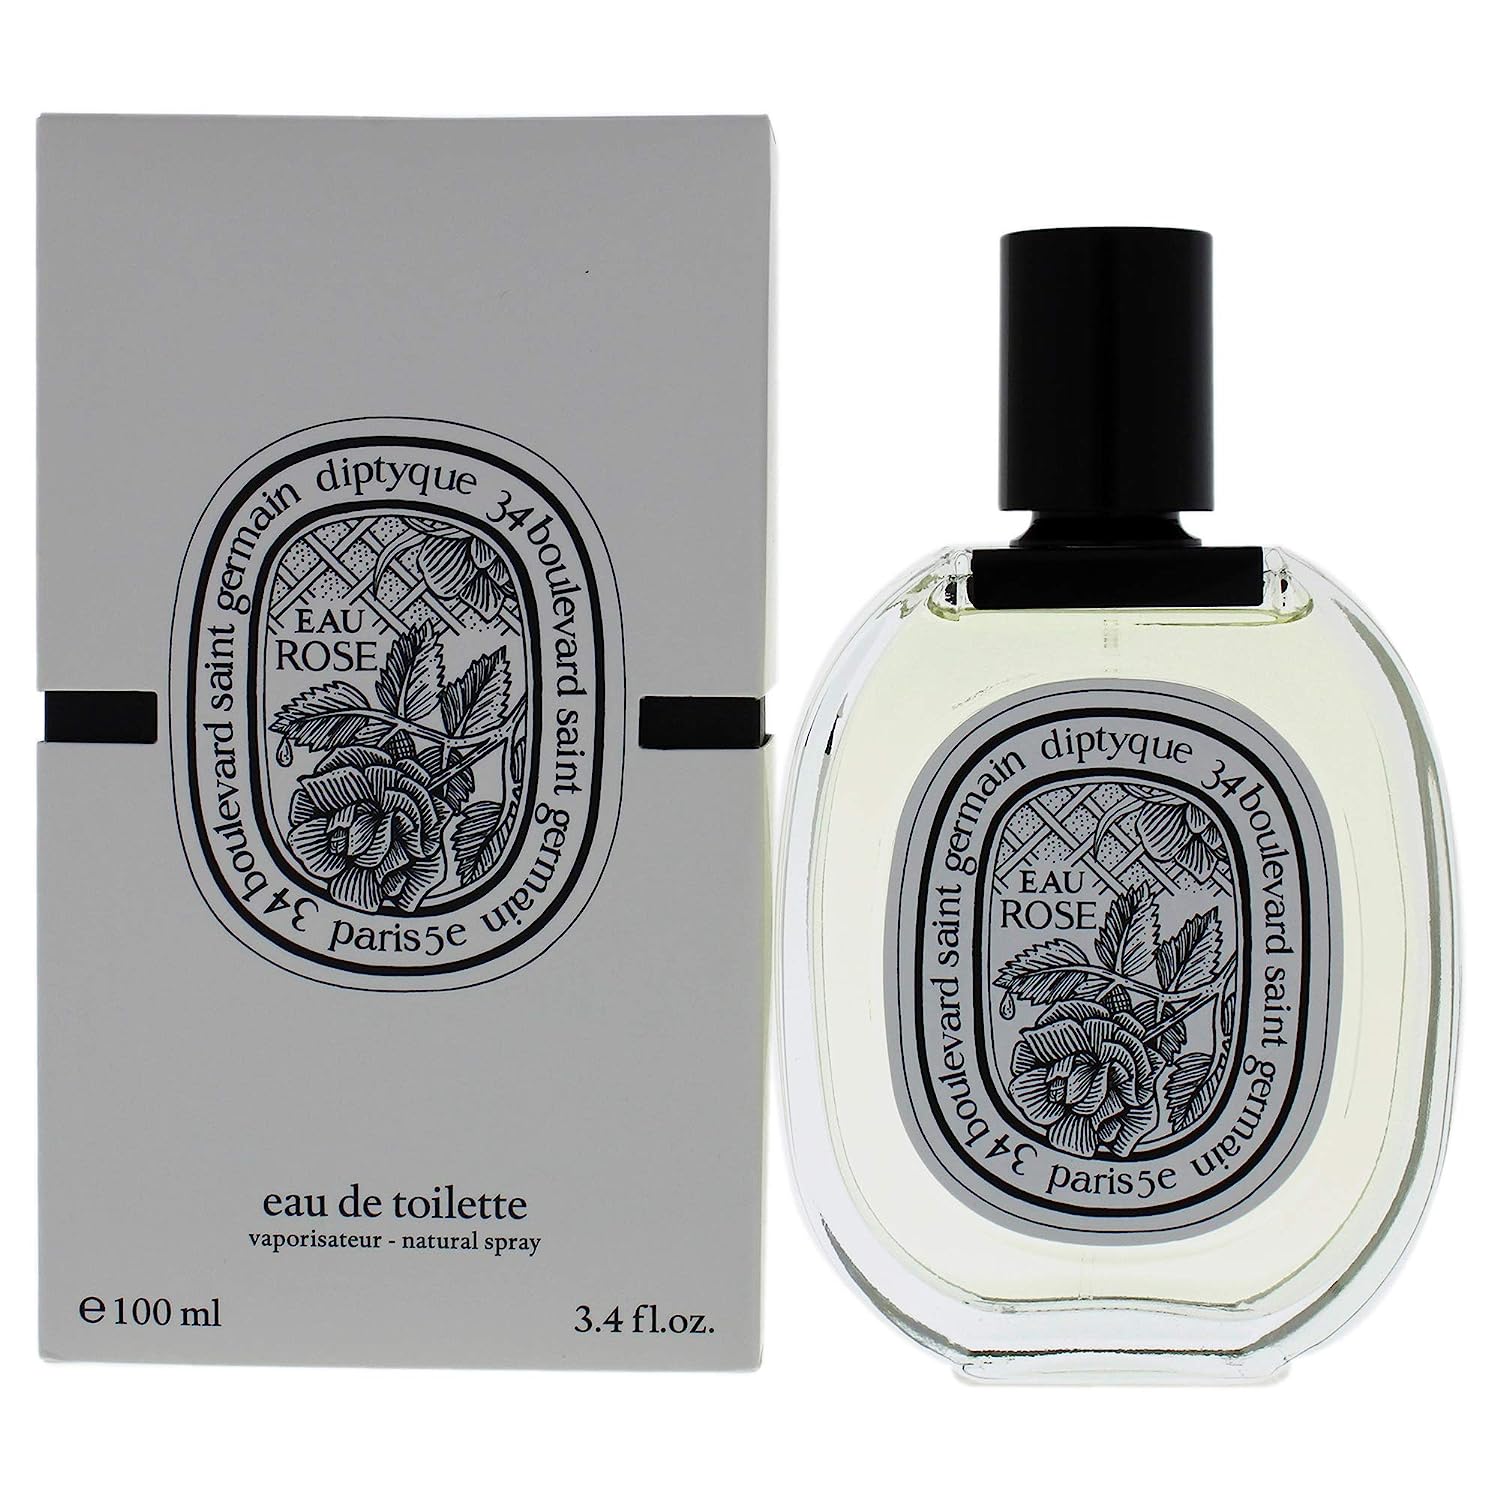 7 Best Diptyque Fragrances That Will Transport You to Magical Lands ...